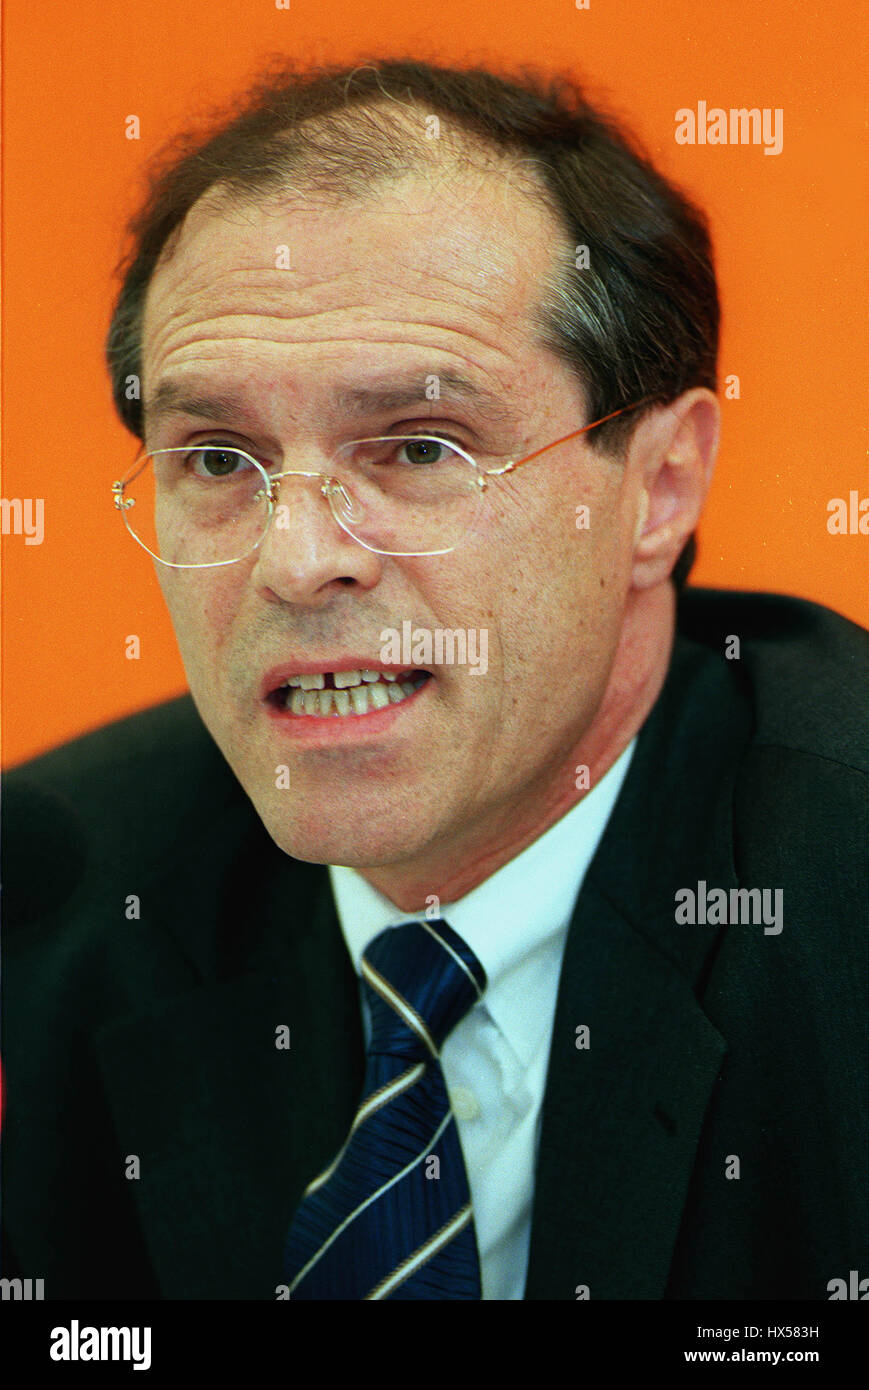 MICHAEL STEINER GERMAN FOREIGN POLICY ADVISOR 21 June 1999 Stock Photo